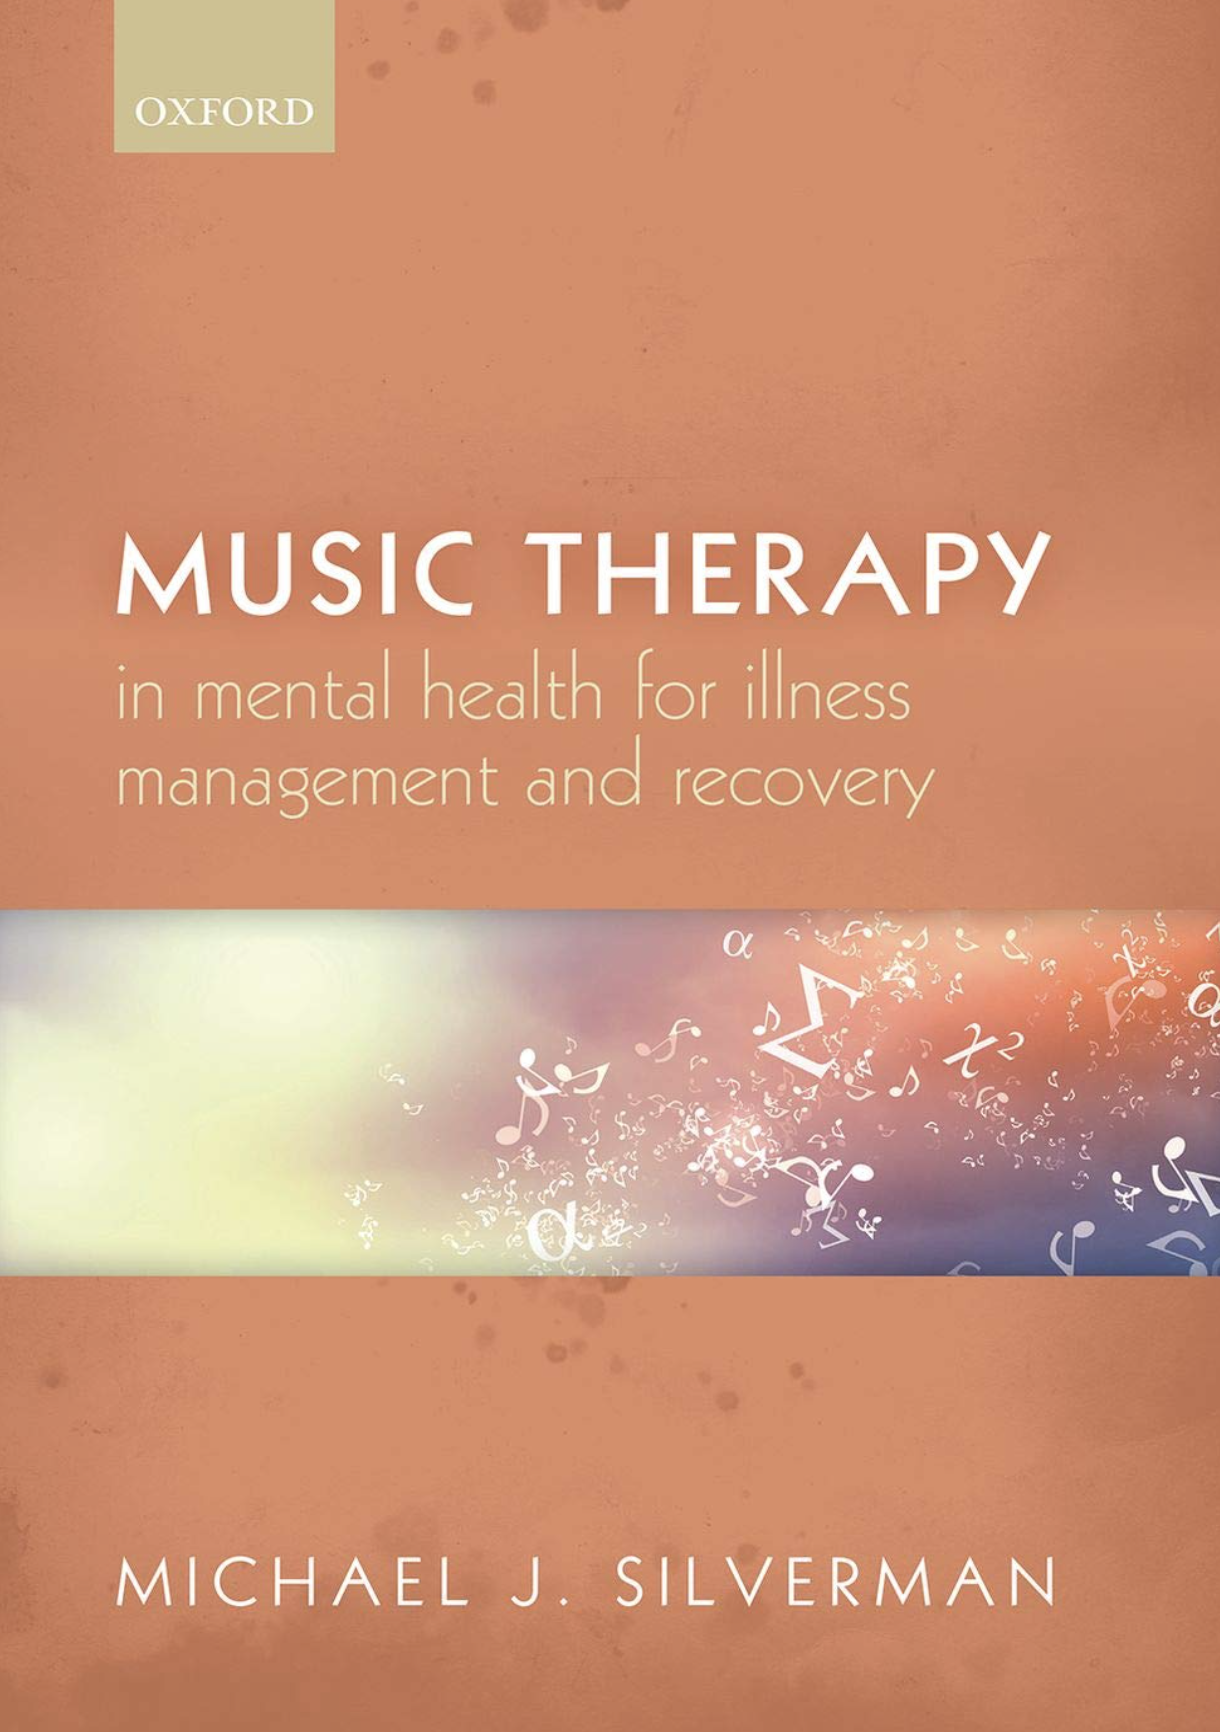 Music therapy in mental health for illness management and recovery